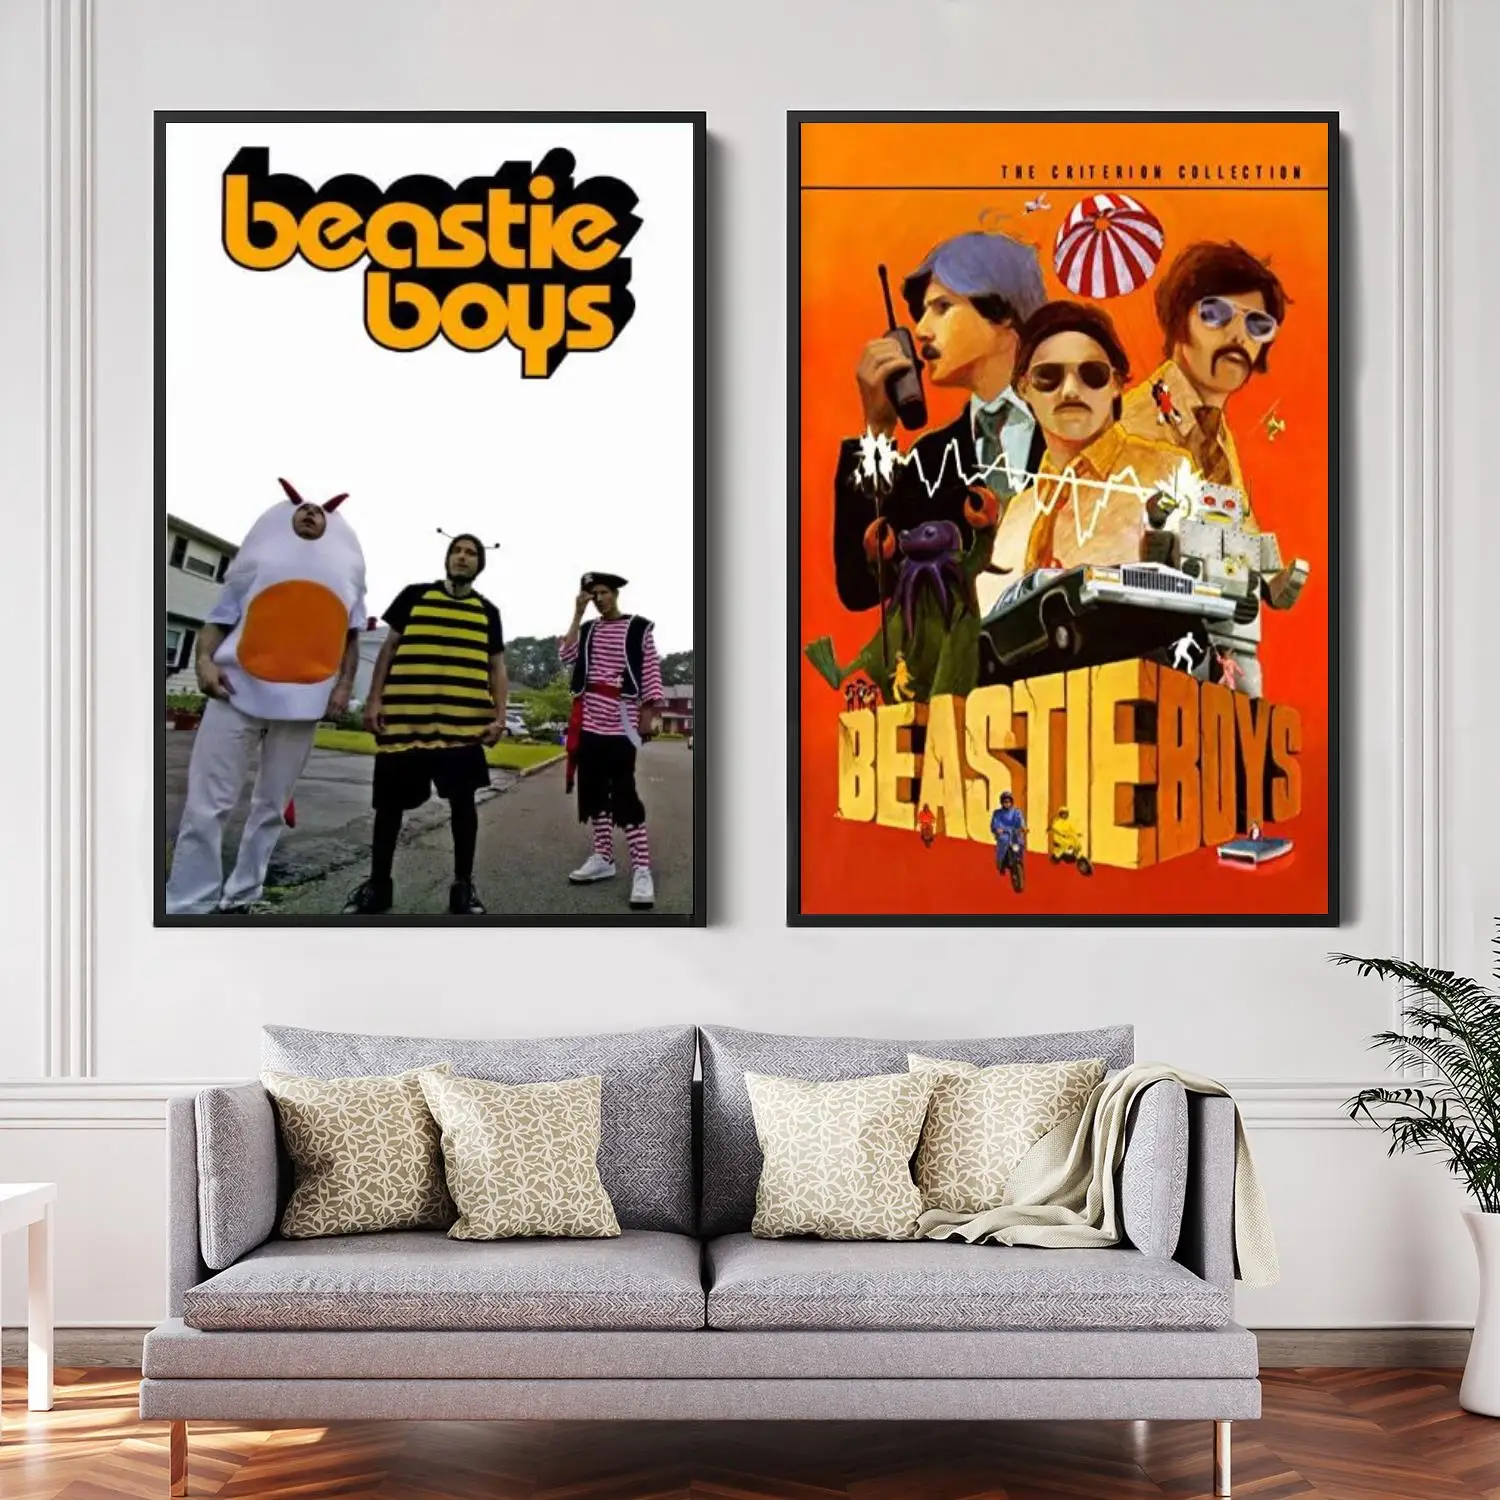 

beastie boys Singer Decorative Canvas Posters Room Bar Cafe Decor Gift Print Art Wall Paintings